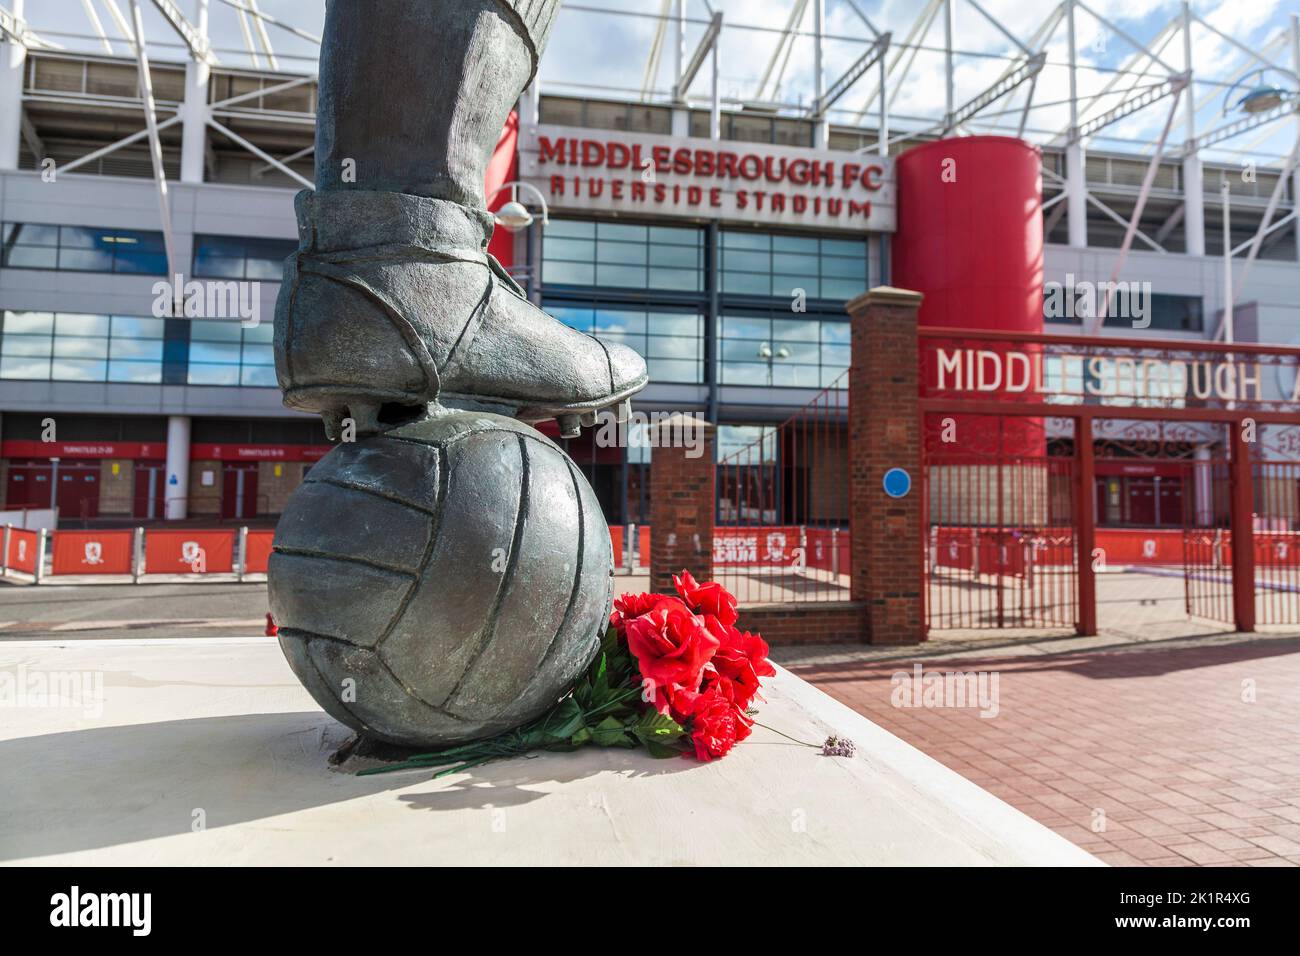 Middlesbrough Football Club's Riverside Stadium ,England,UK,Close up of  football and players boot in foreground Stock Photo